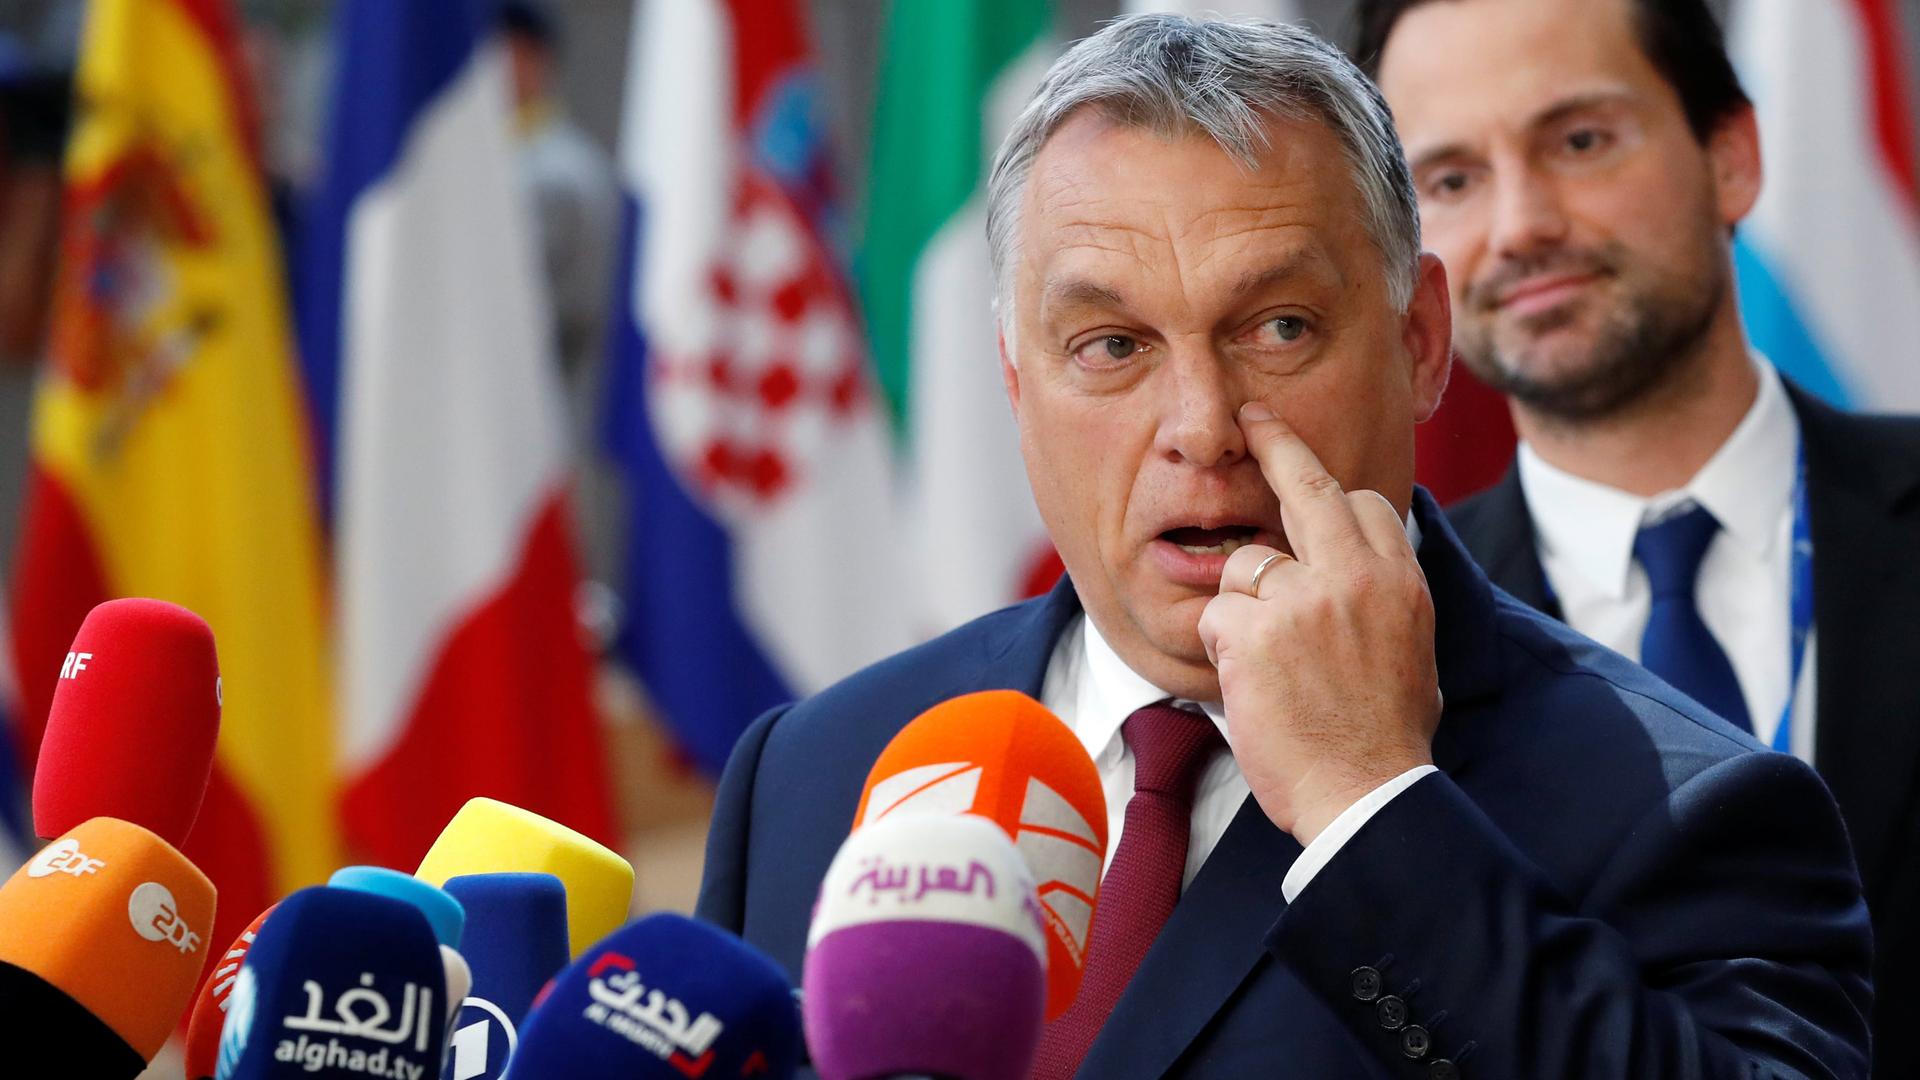 Hungarian Prime Minister Viktor Orbán stands in front of several flags while speaking into several media microphones